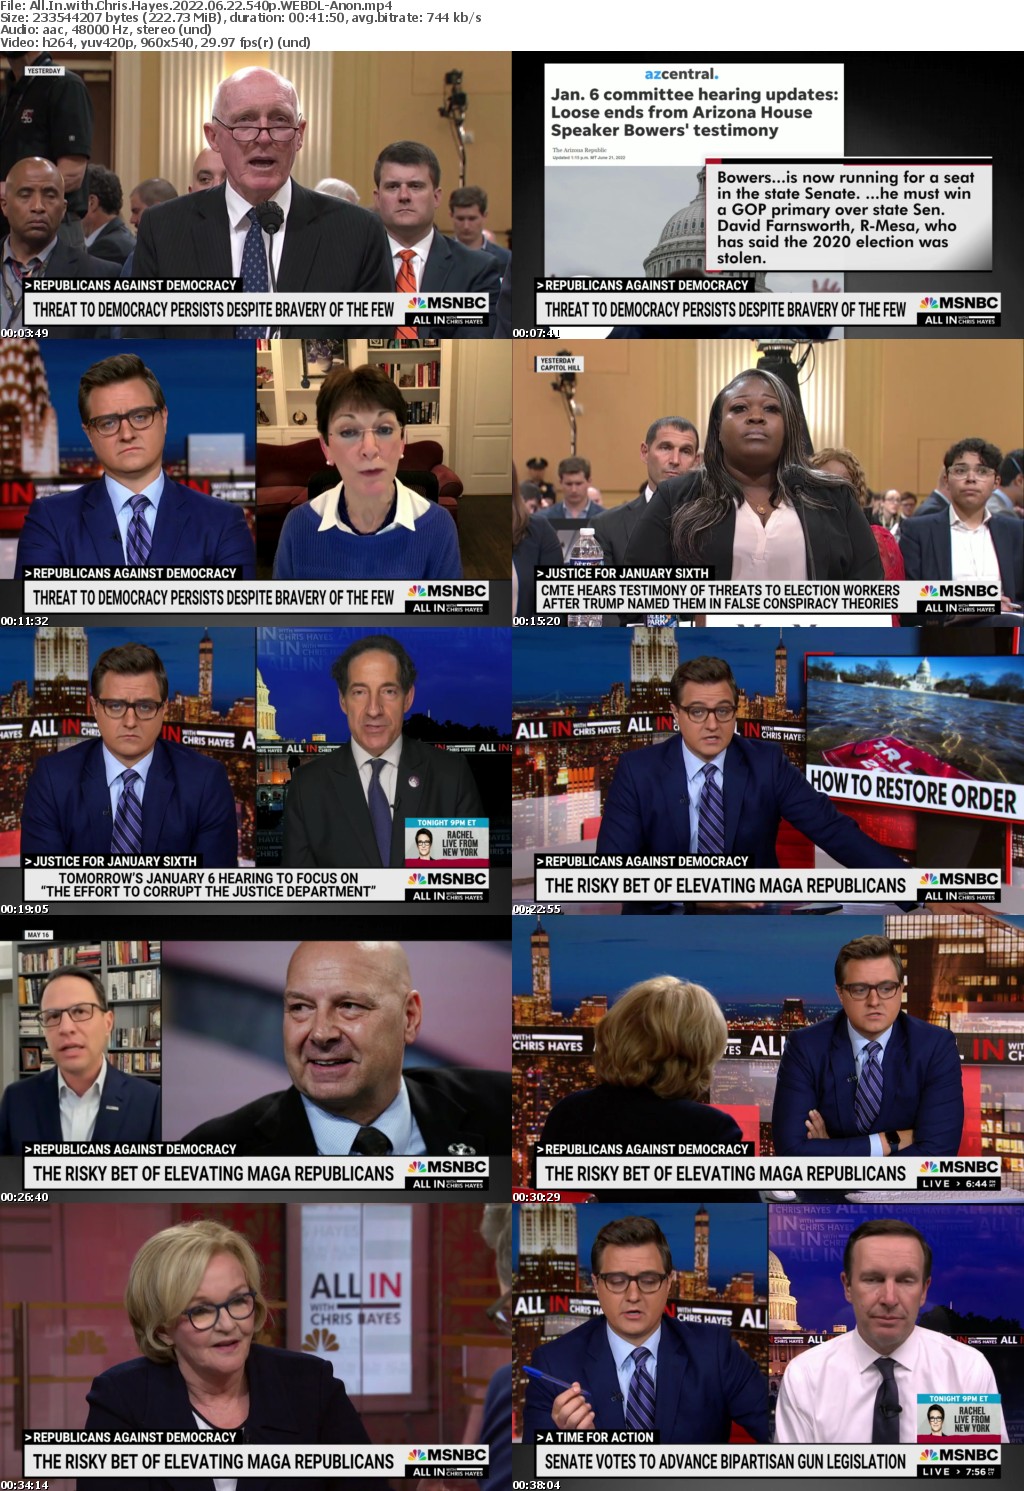 All In with Chris Hayes 2022 06 22 540p WEBDL-Anon